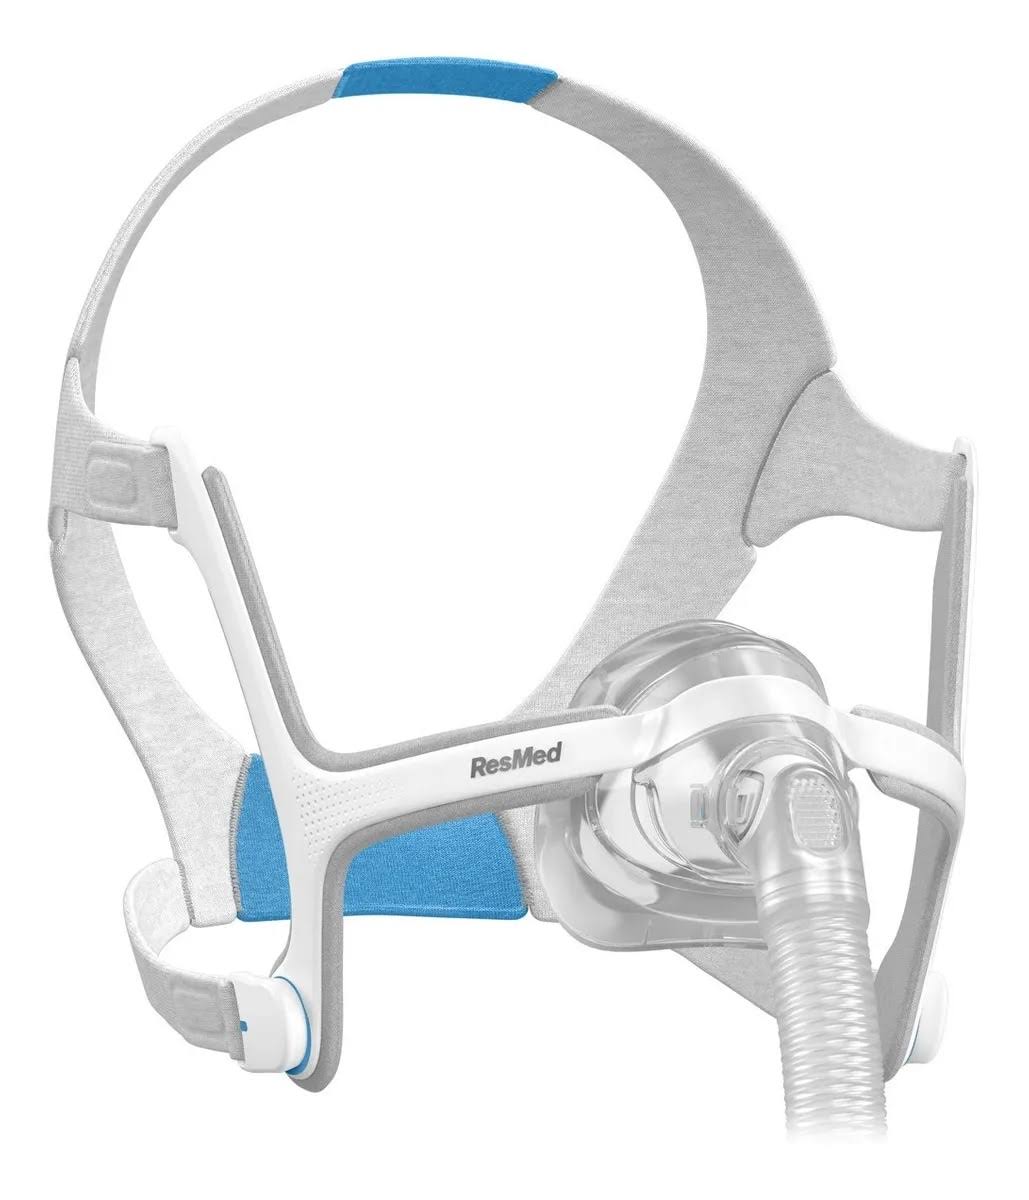 50% Off - New ResMed AirFit N20 Nasal Mask with Headgear, Size L